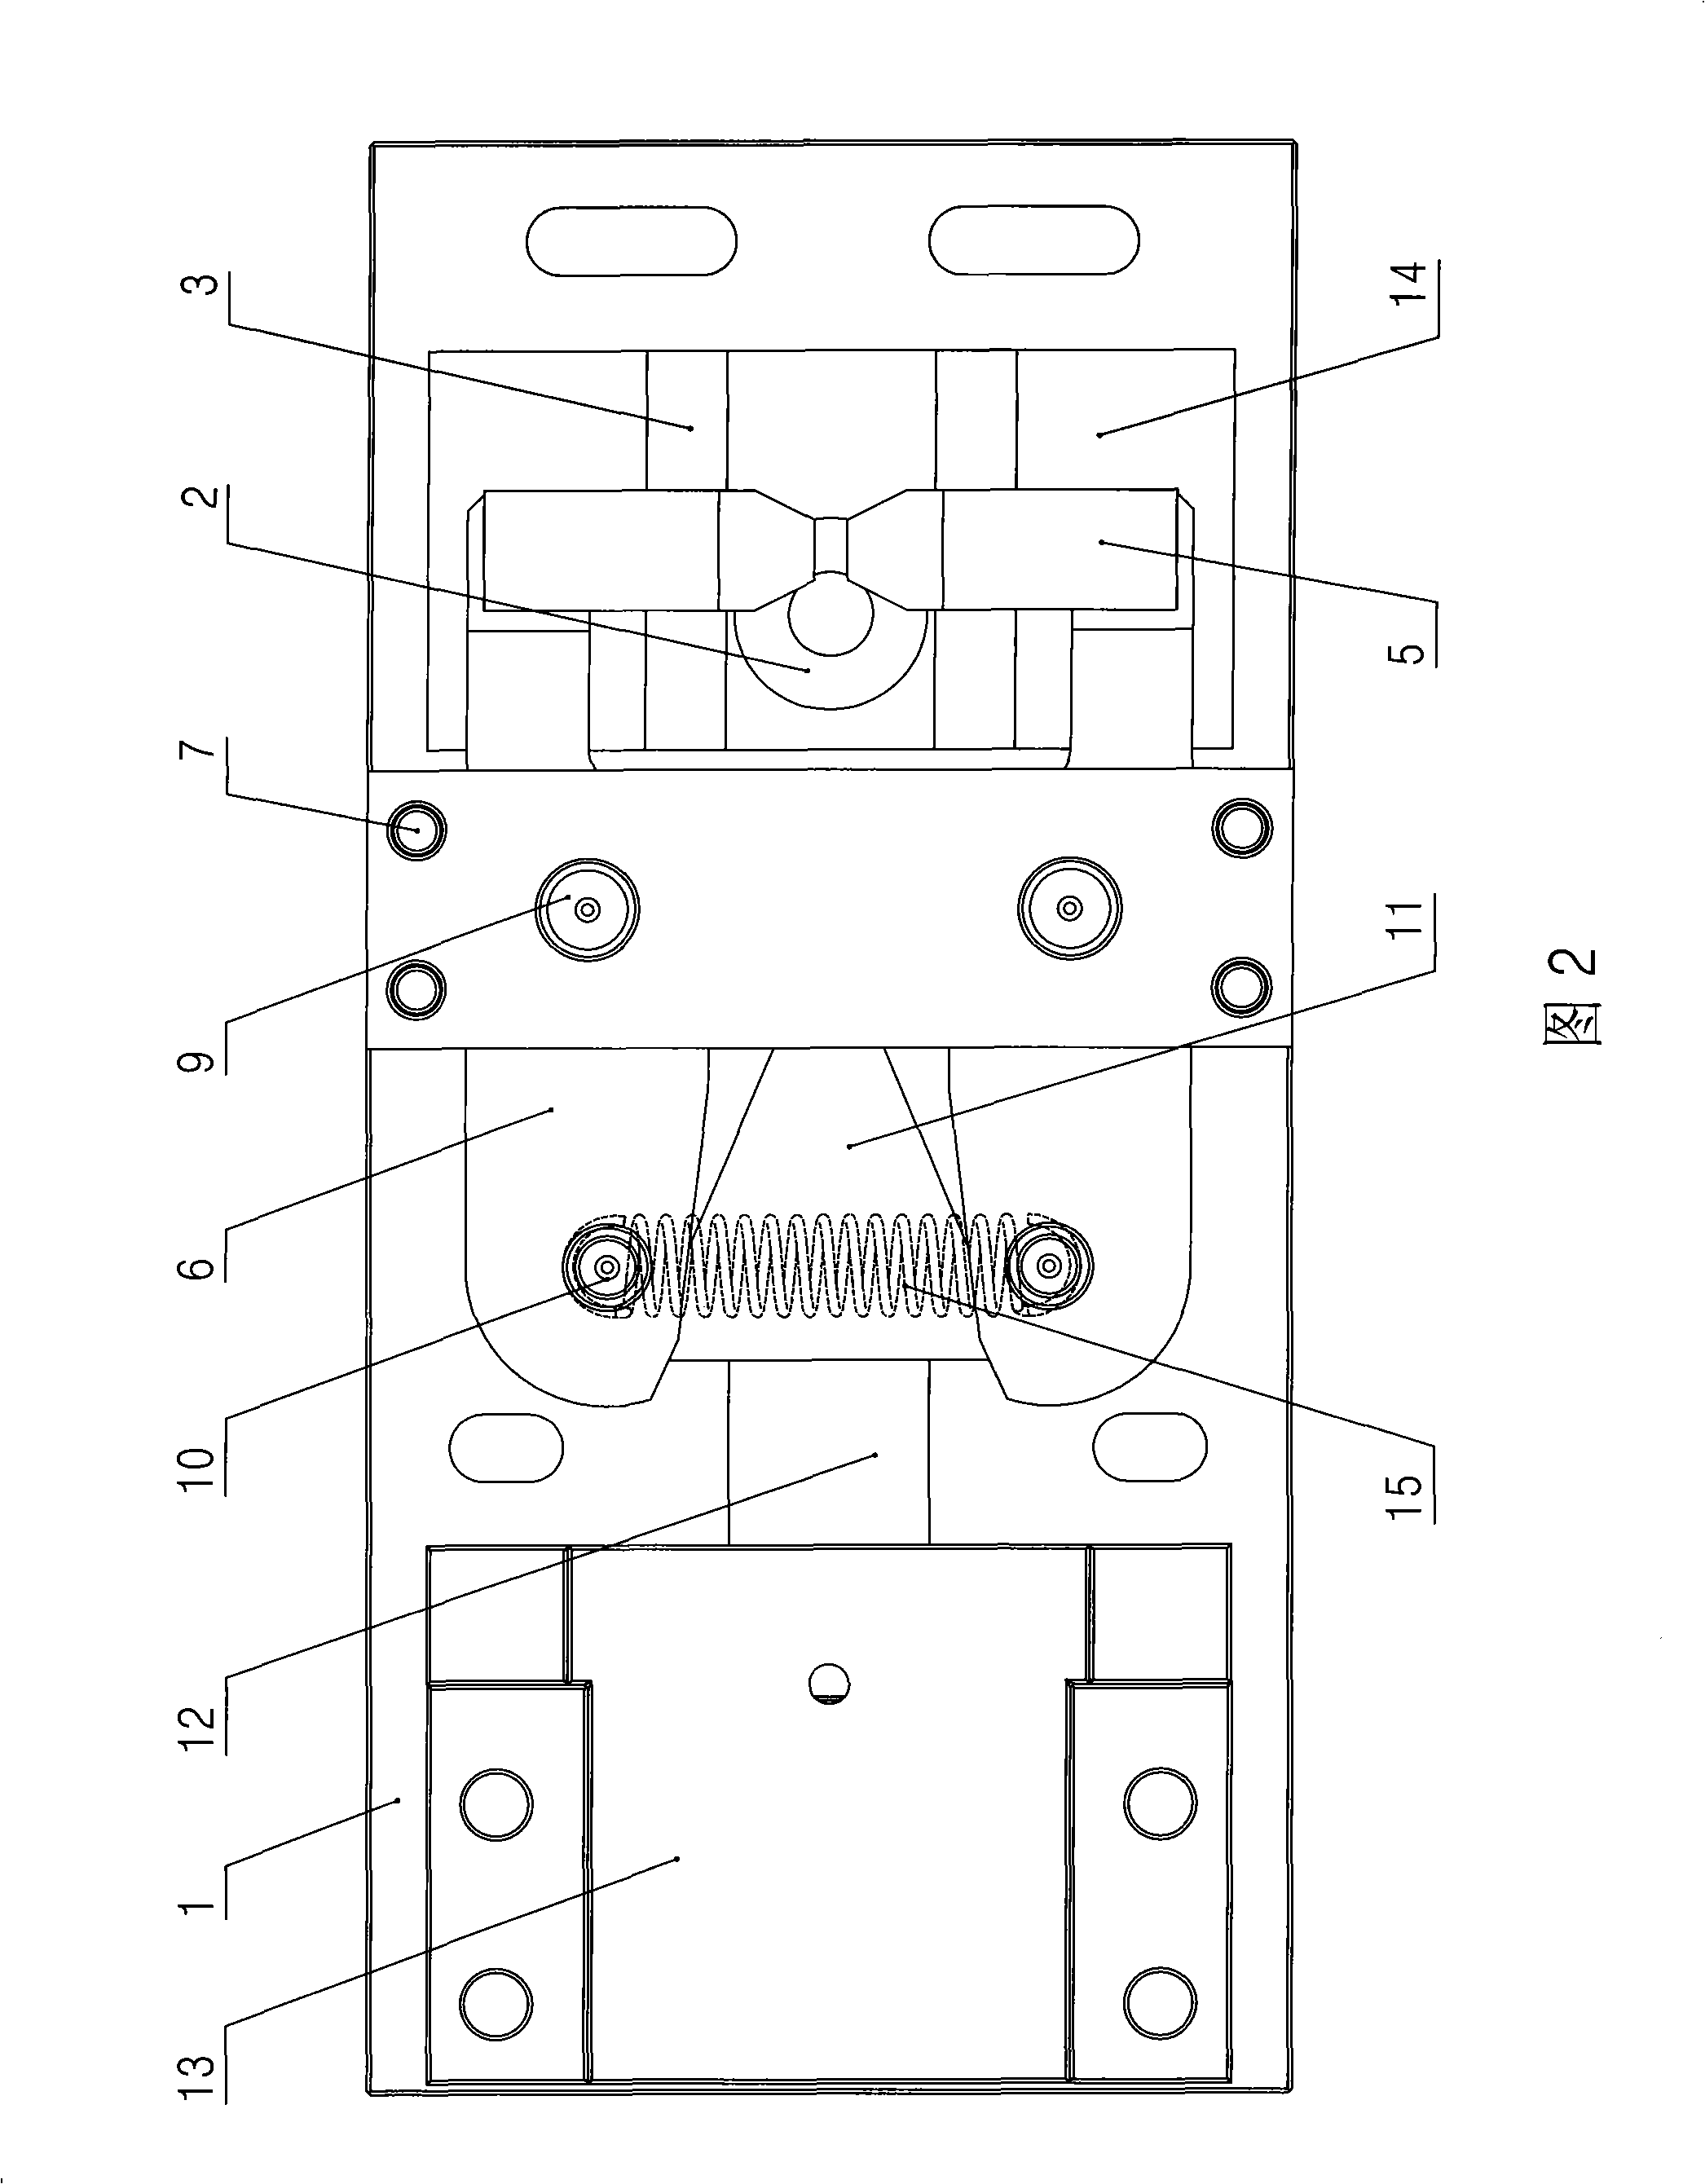 Clamp for milling half-moon groove